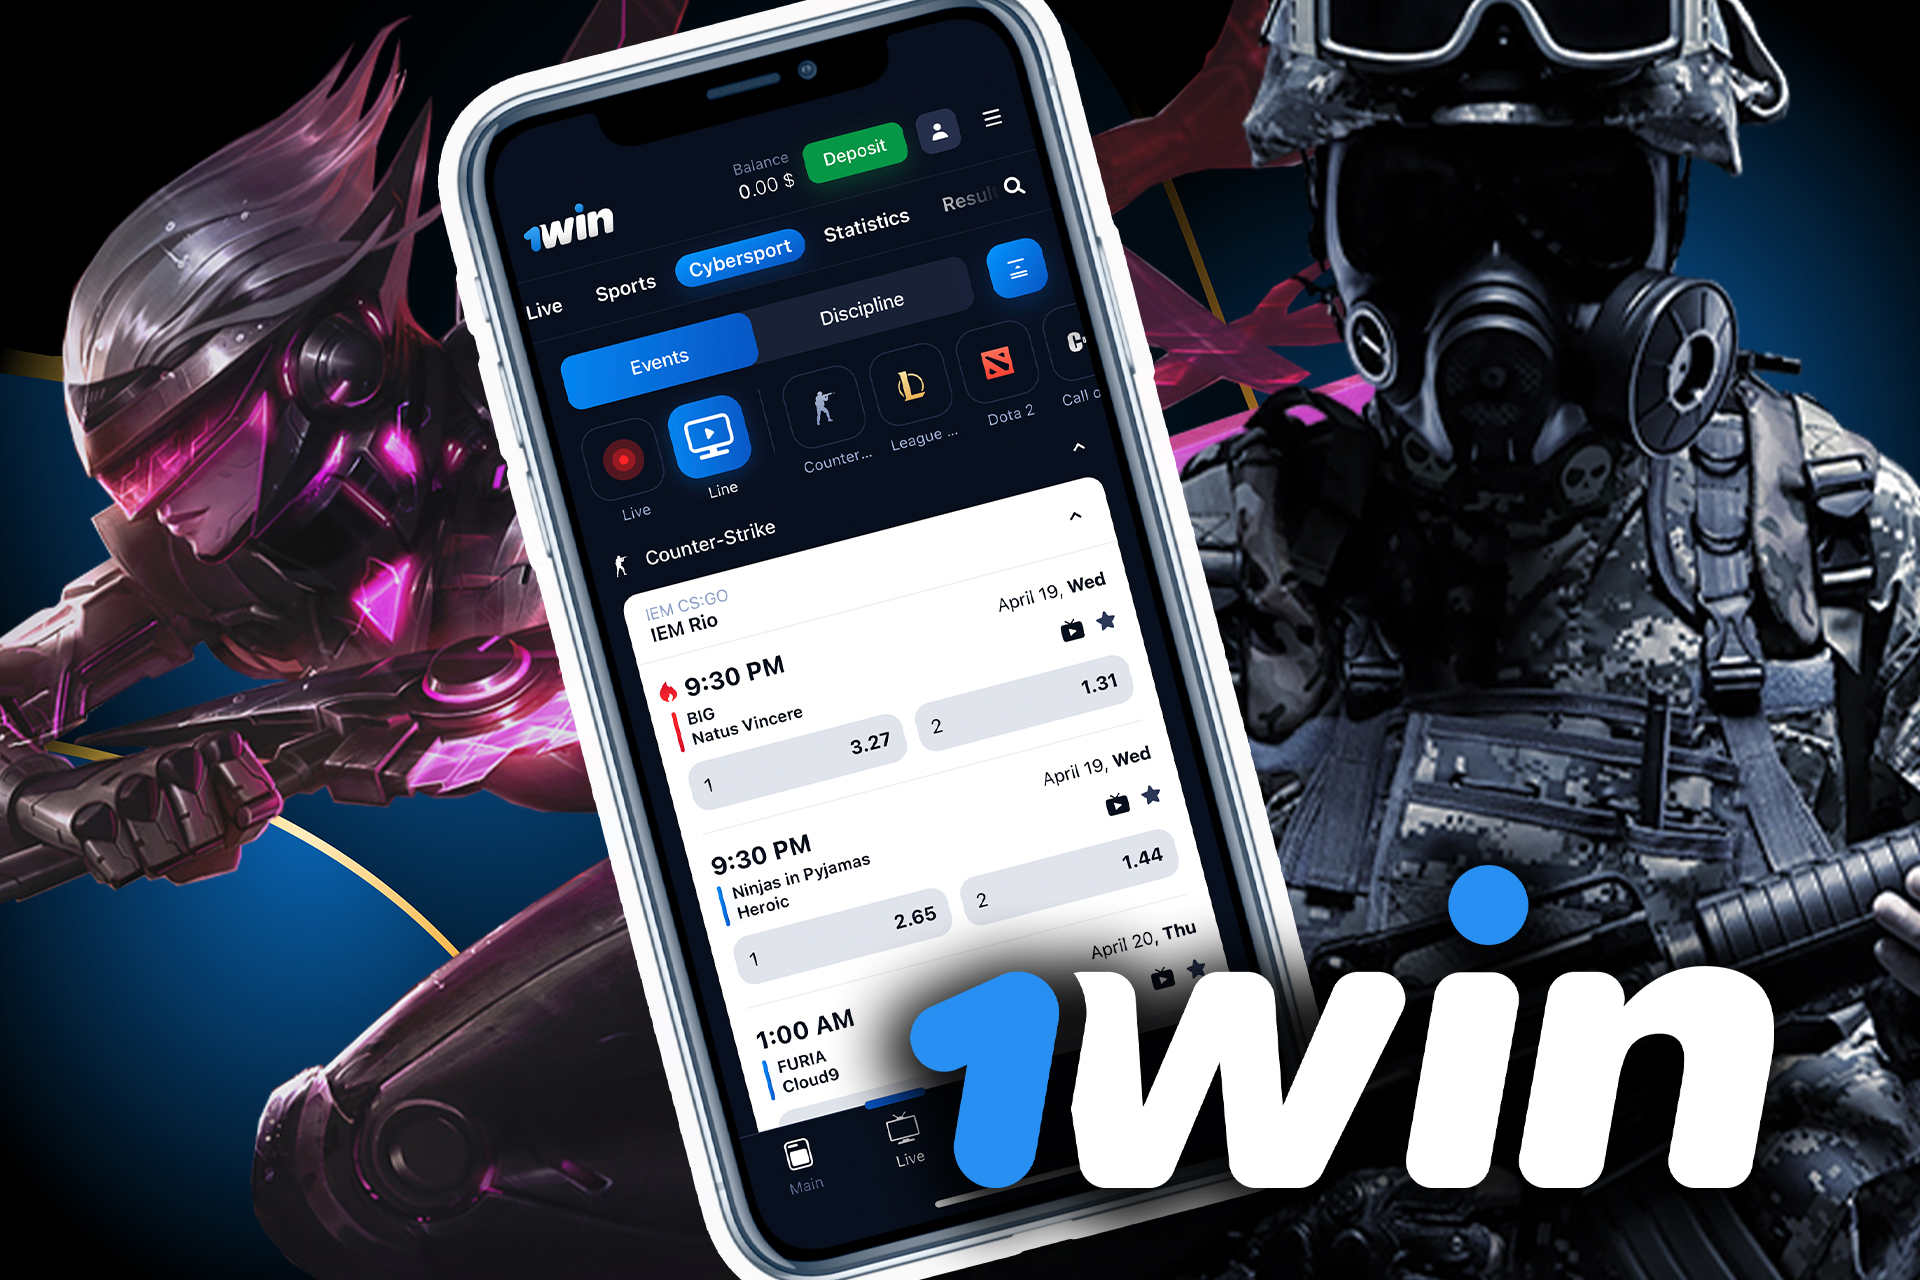 You can also place bets on cybersport in the 1win app.